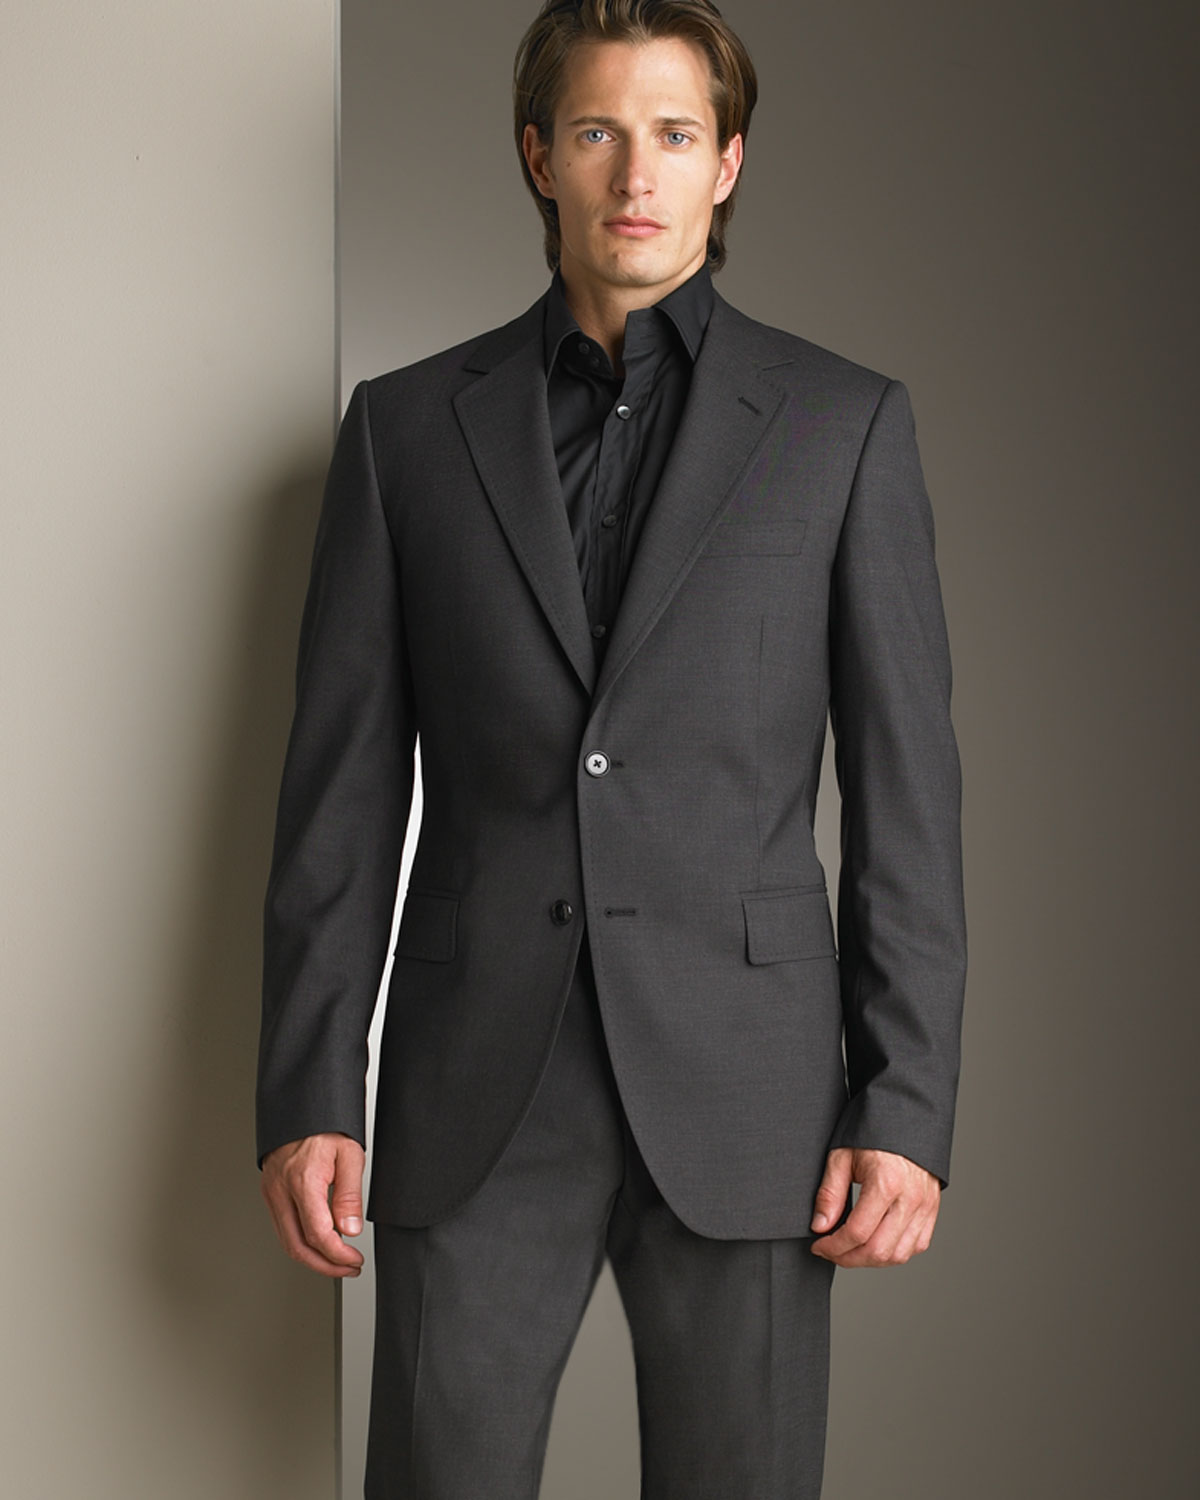 dolce and gabbana mens suit